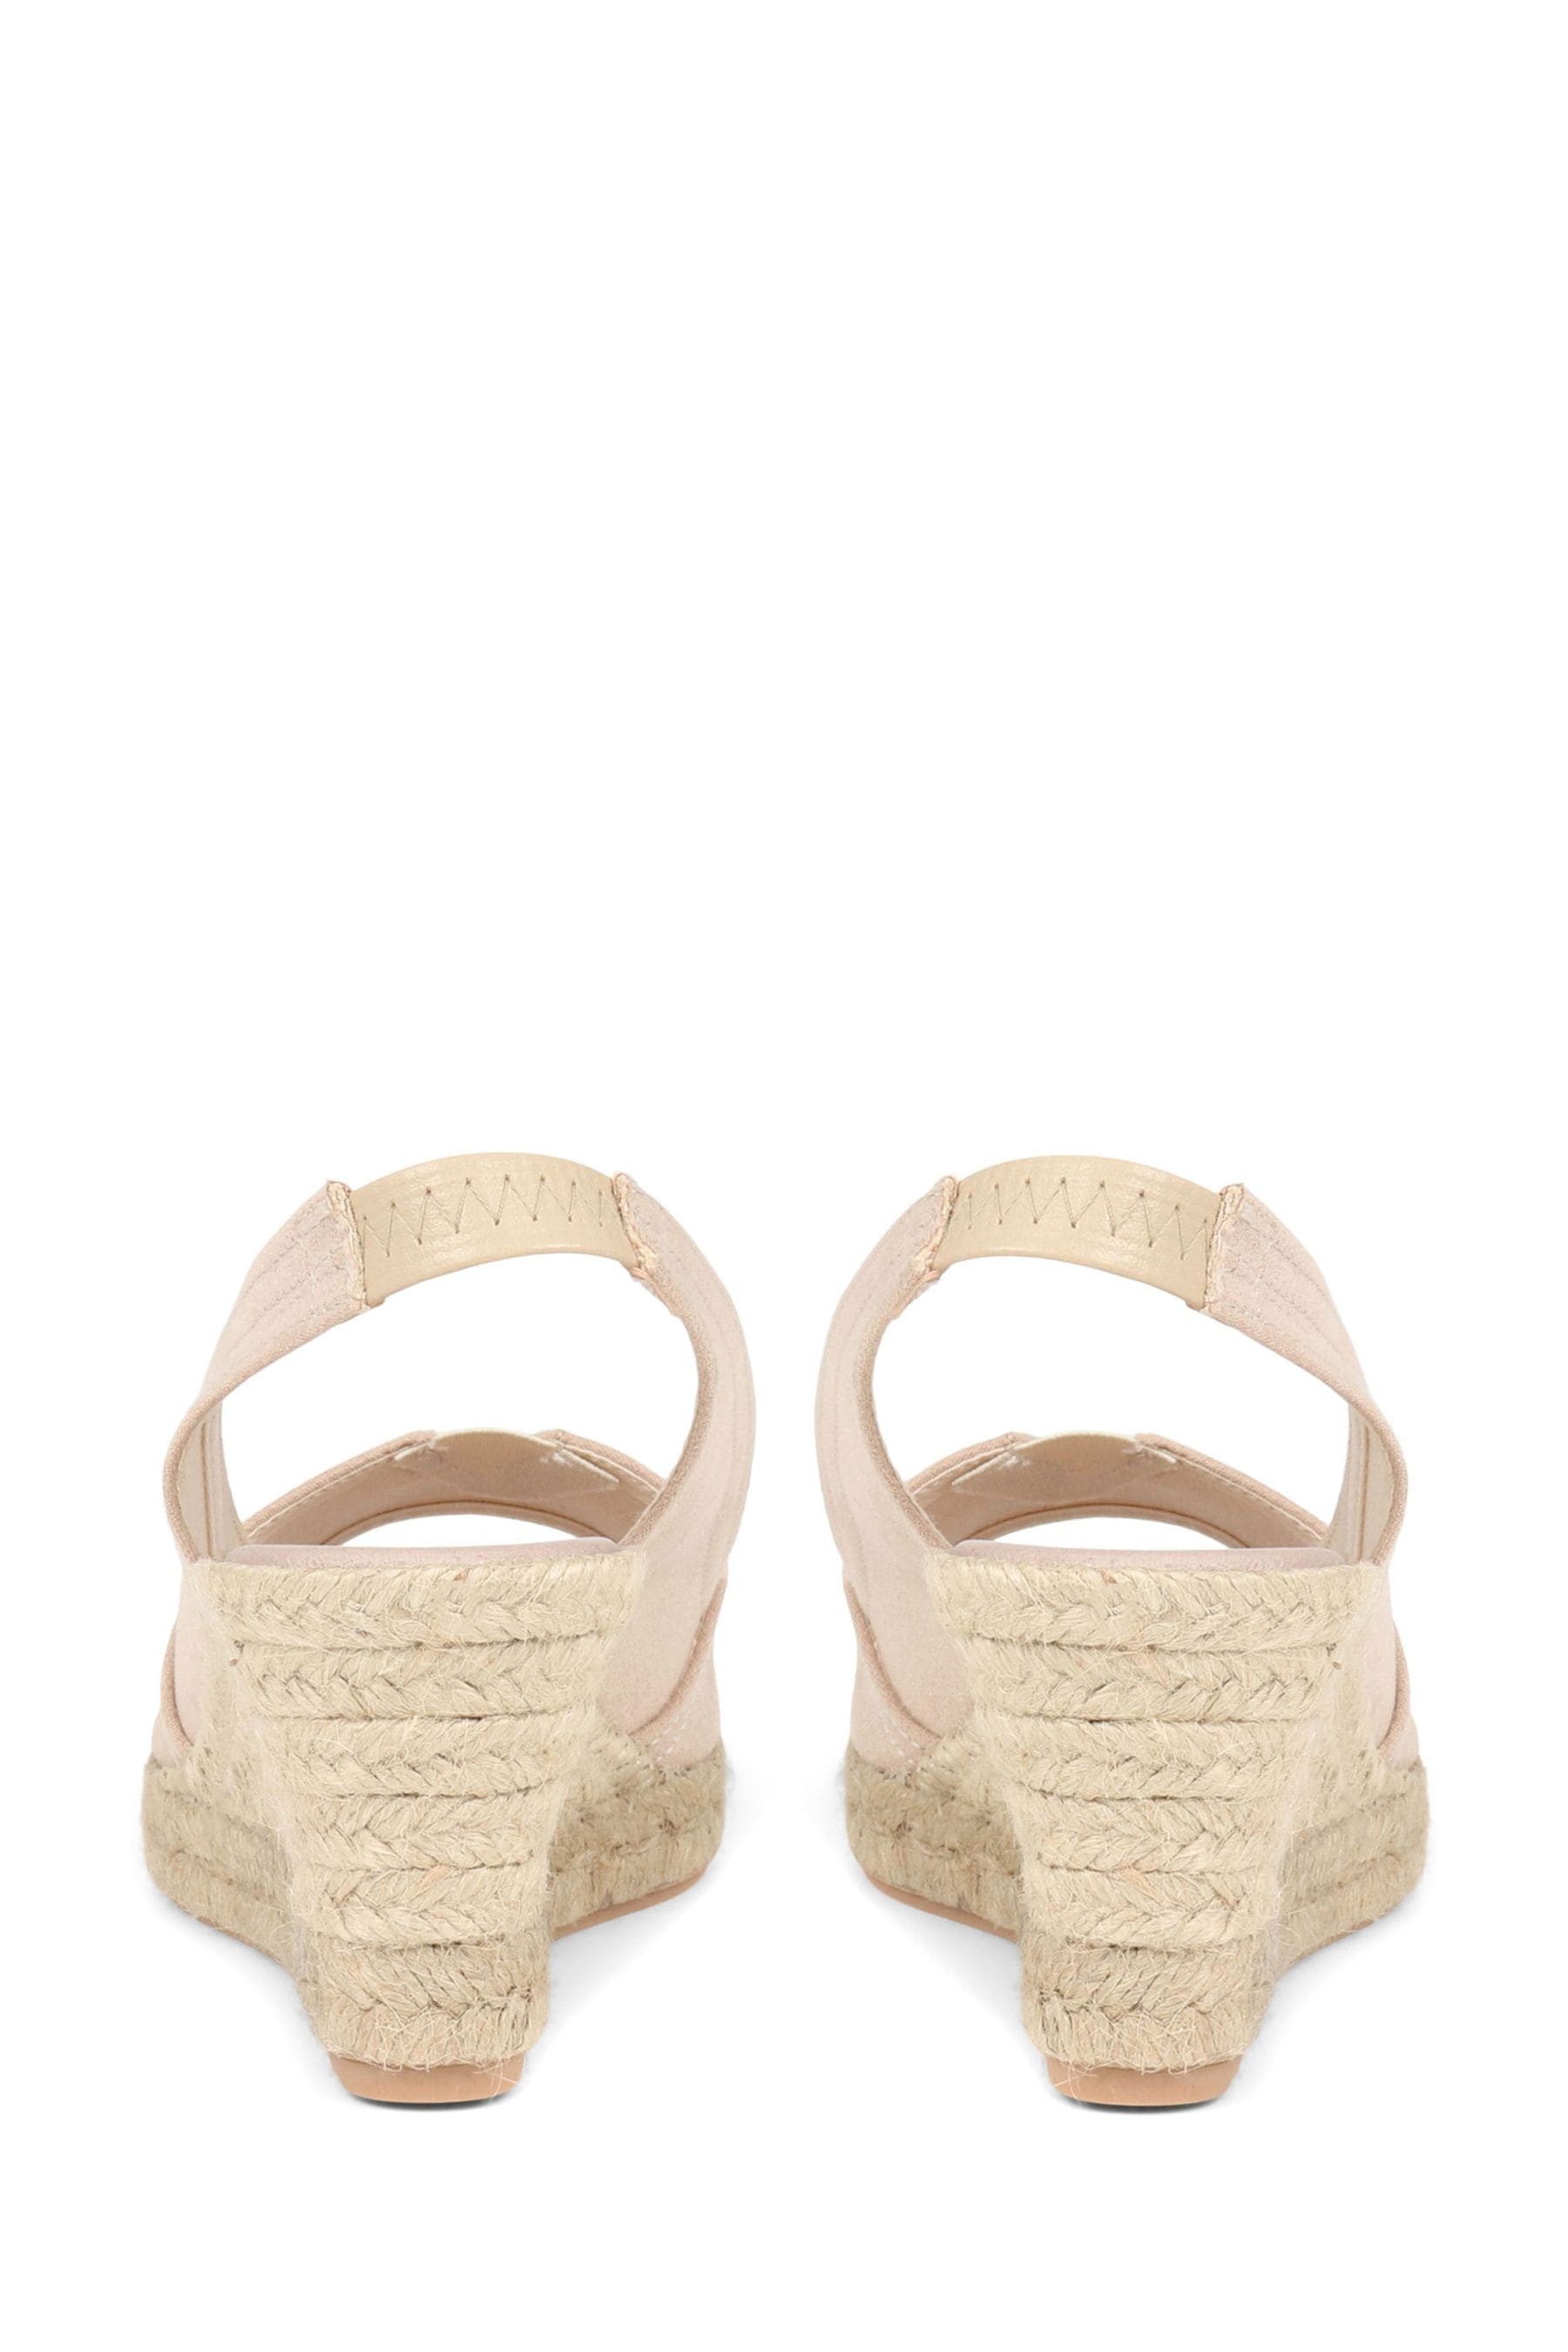 Buy Pavers Peep Toe Wedge Nude Sandals from the Next UK online shop